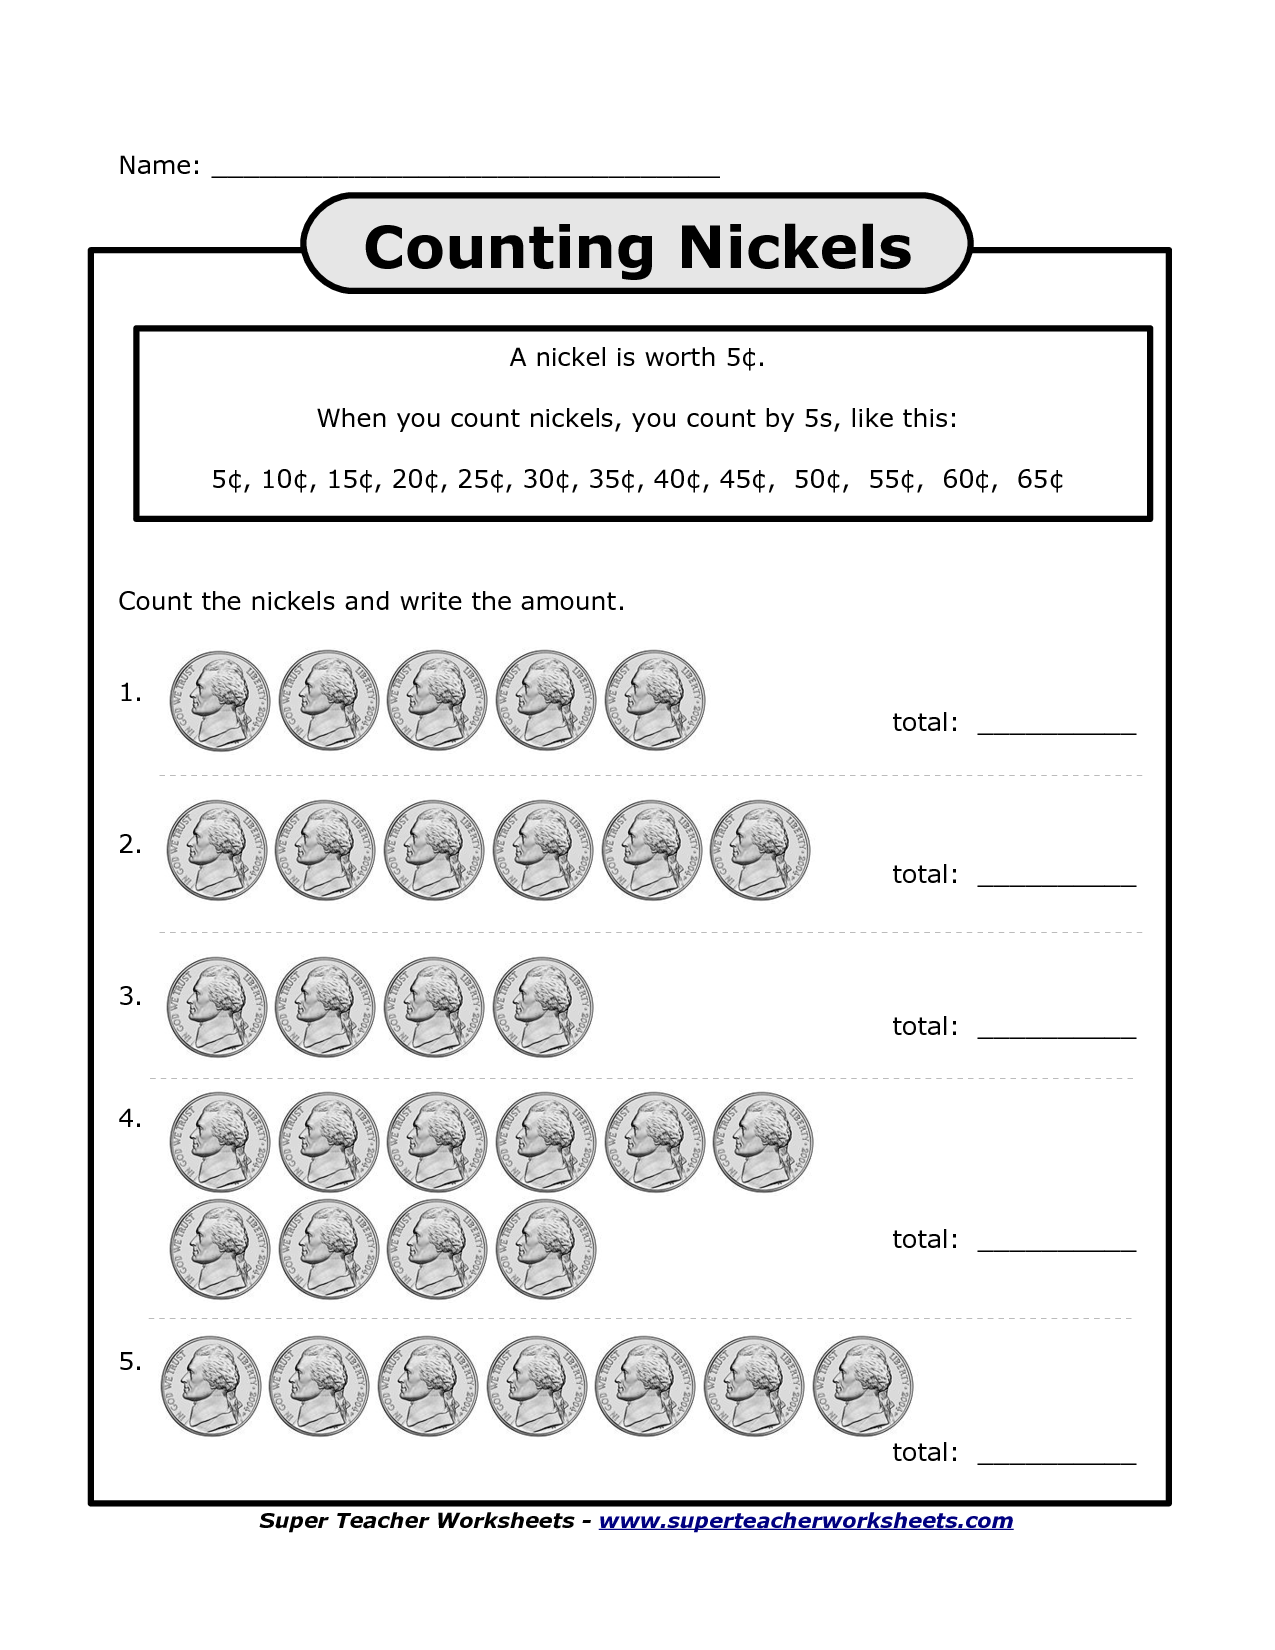 Counting Nickels and Pennies Worksheet Image